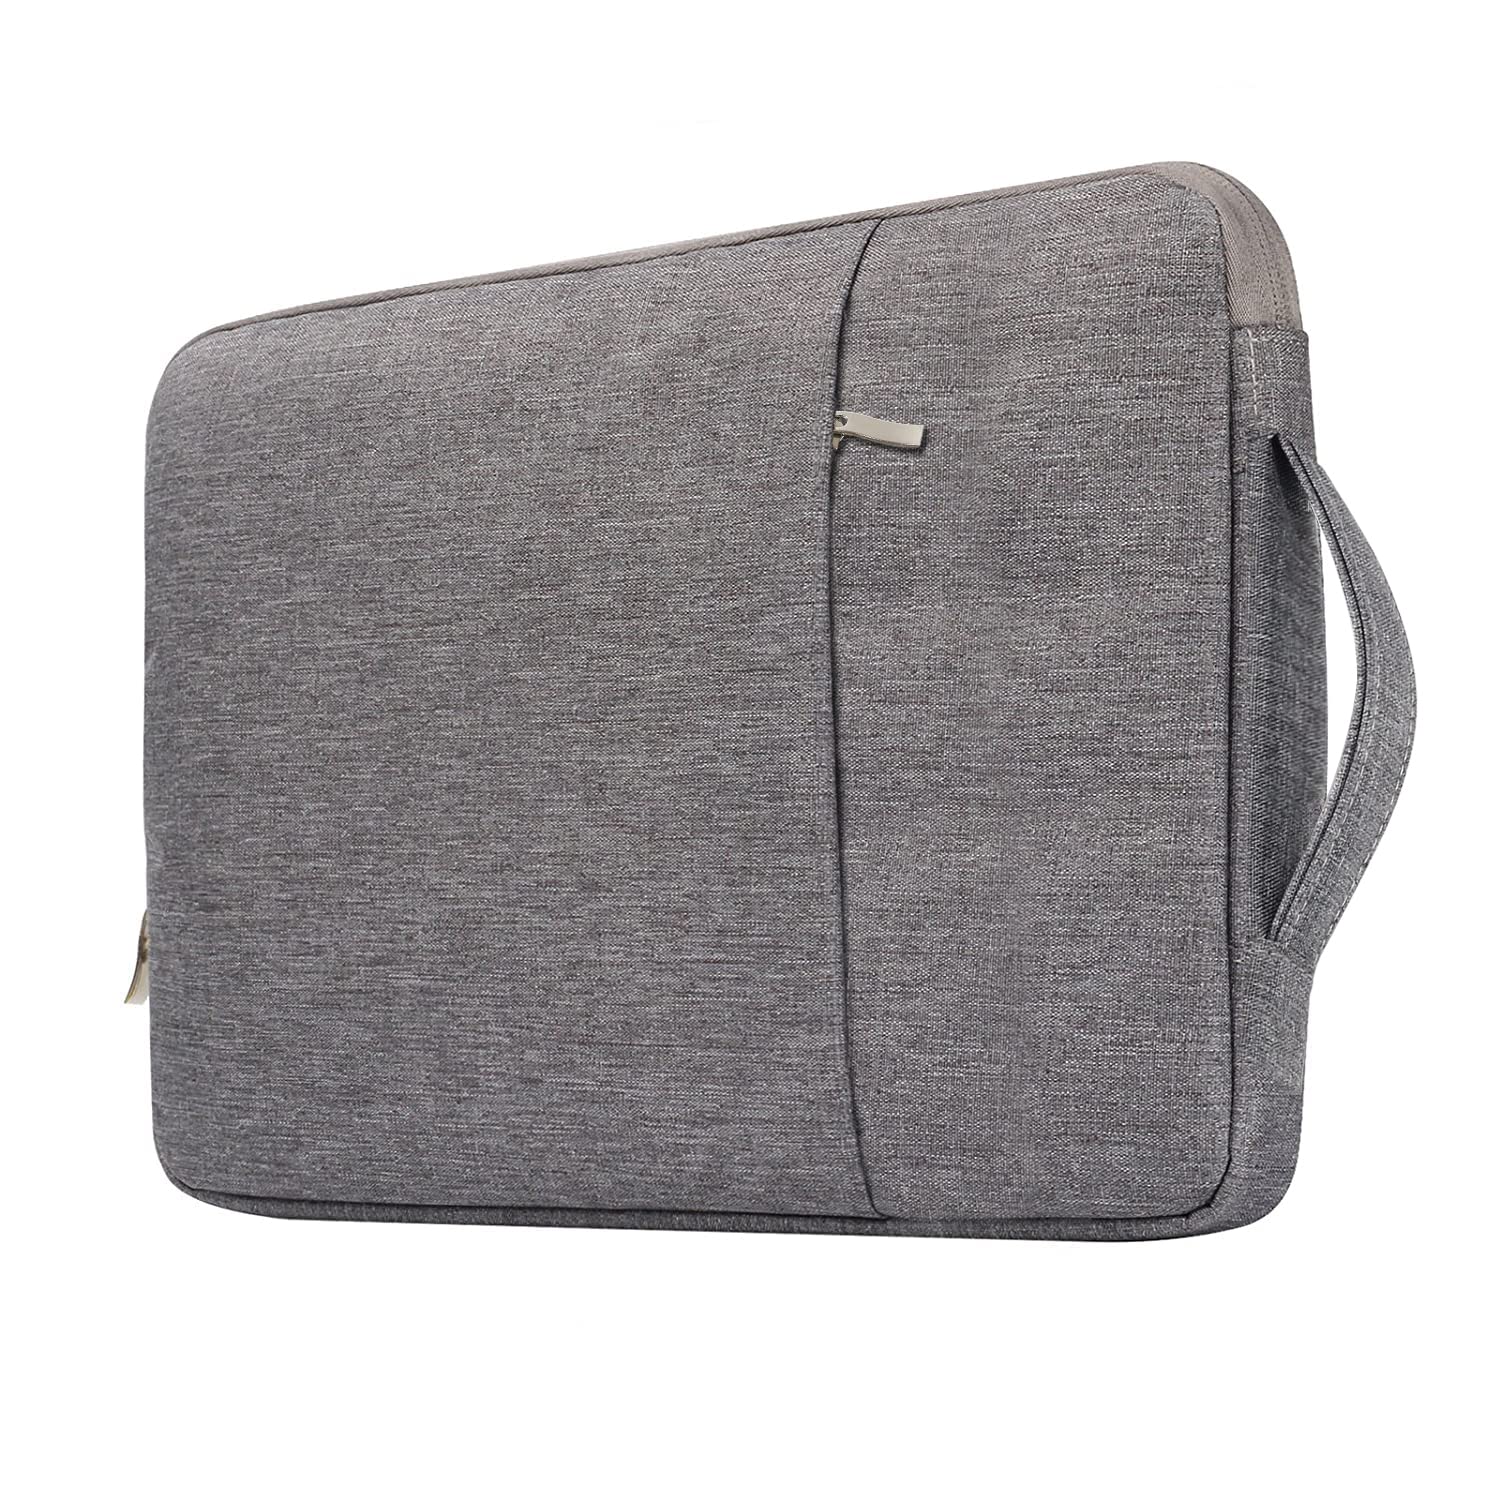 Gary - Robustrion Premium Denim Series Laptop Carrying Case Sleeve Bag for 14 to 15.6 inch Laptops